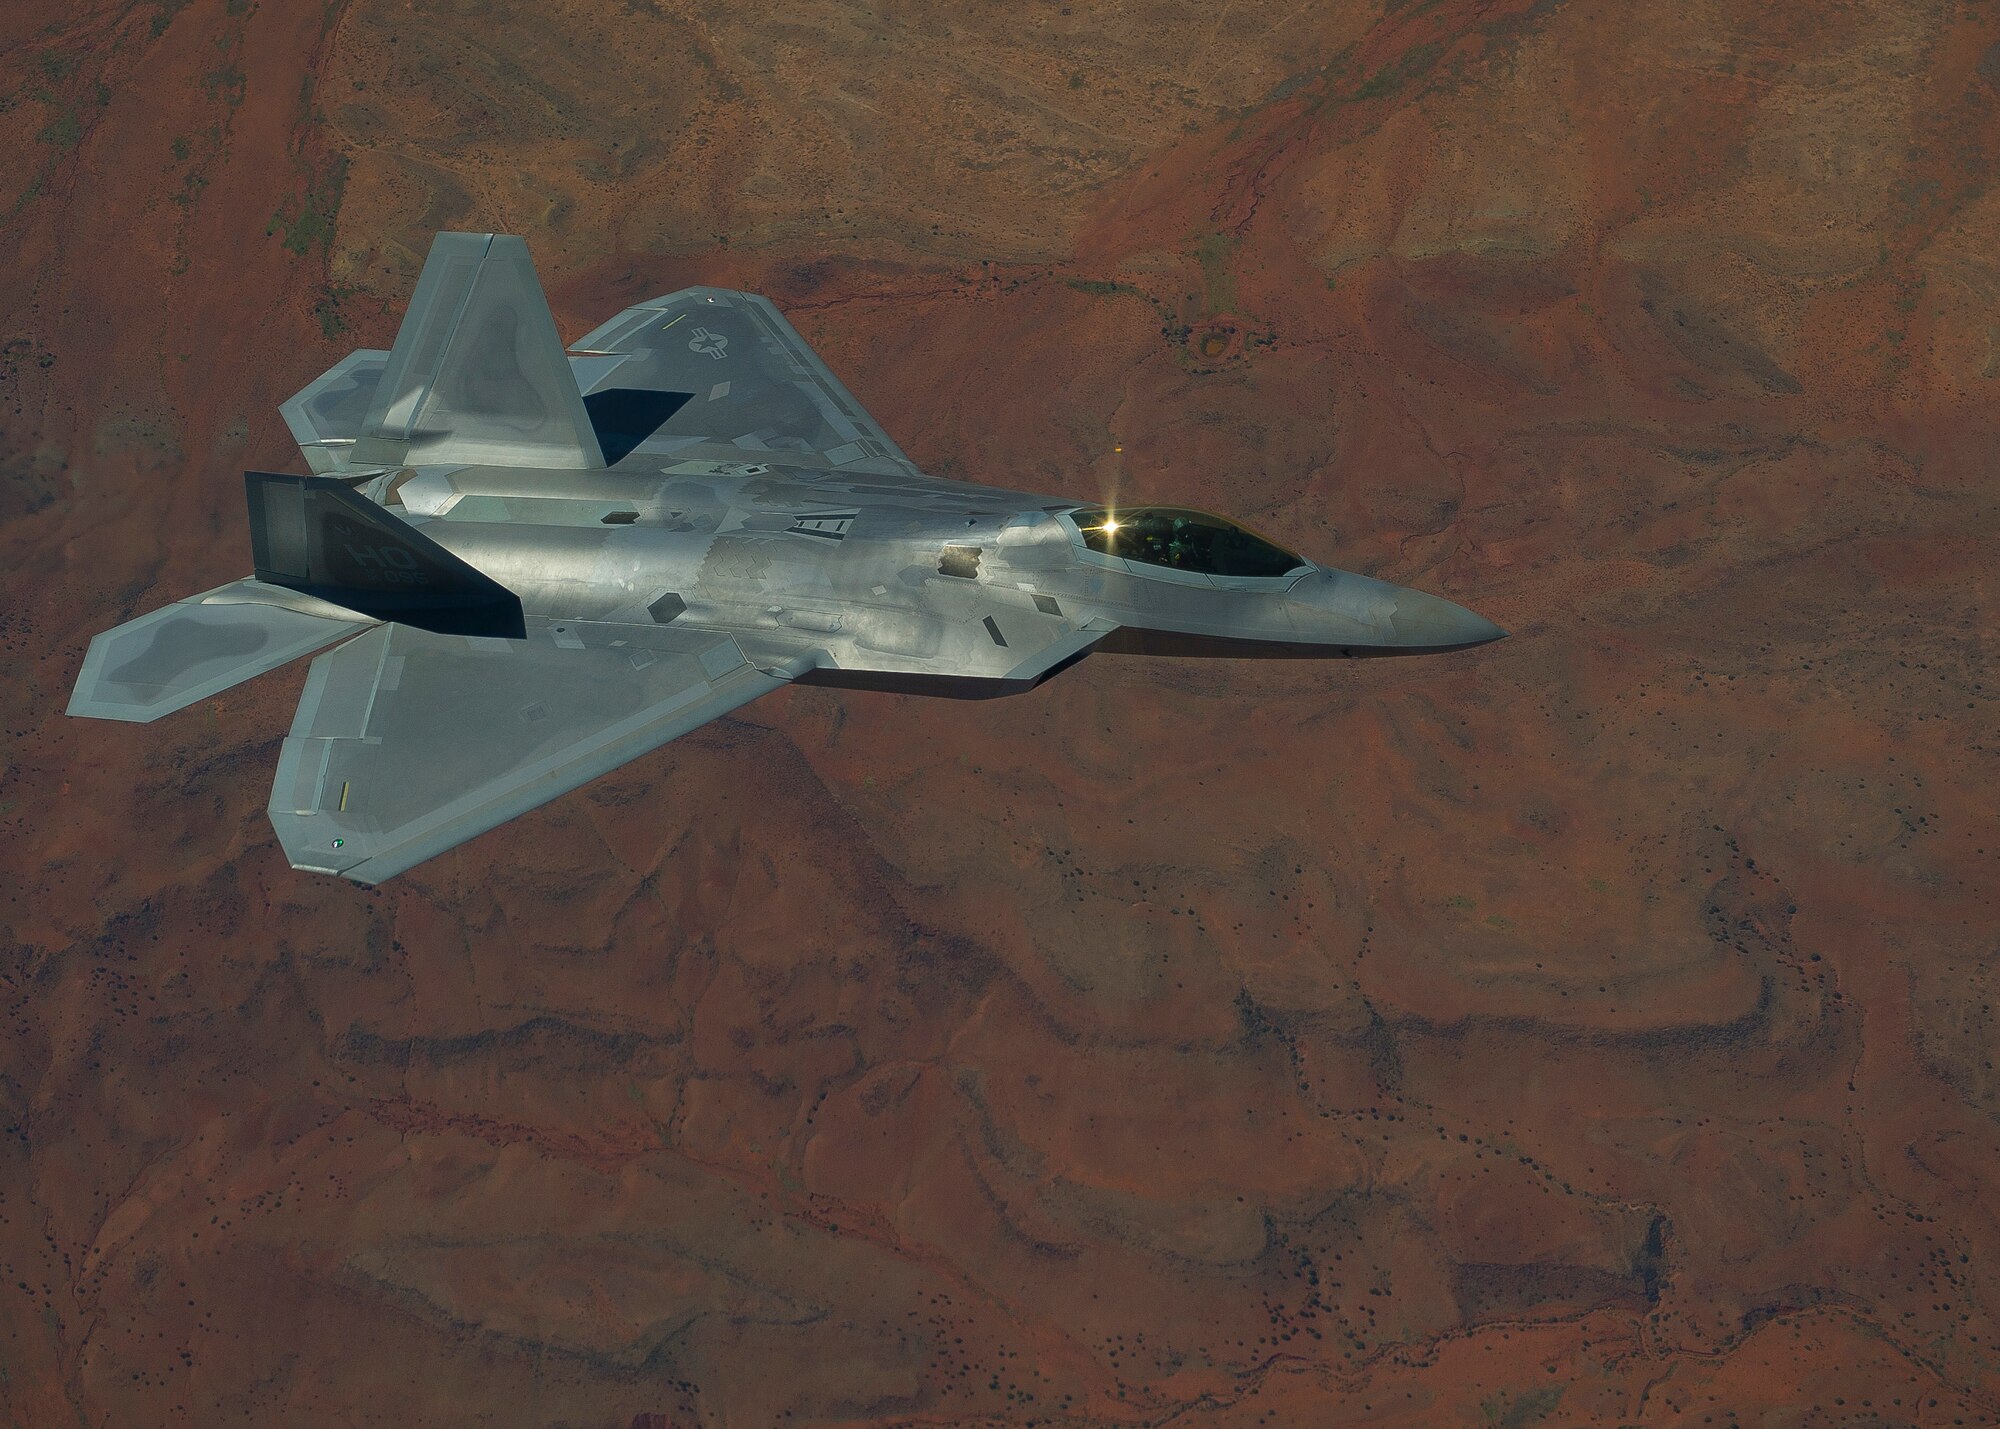 HOLLOMAN AIR FORCE BASE, N.M. -- An F-22 Raptor from the 7th Fighter Squadron flies over the Tularosa Basin during an air to air combat mission Sept. 28, 2011. Two Raptors took flight participating in air to air incursion. (U.S. Air Force photo by Senior Airman John D. Strong II / Released)